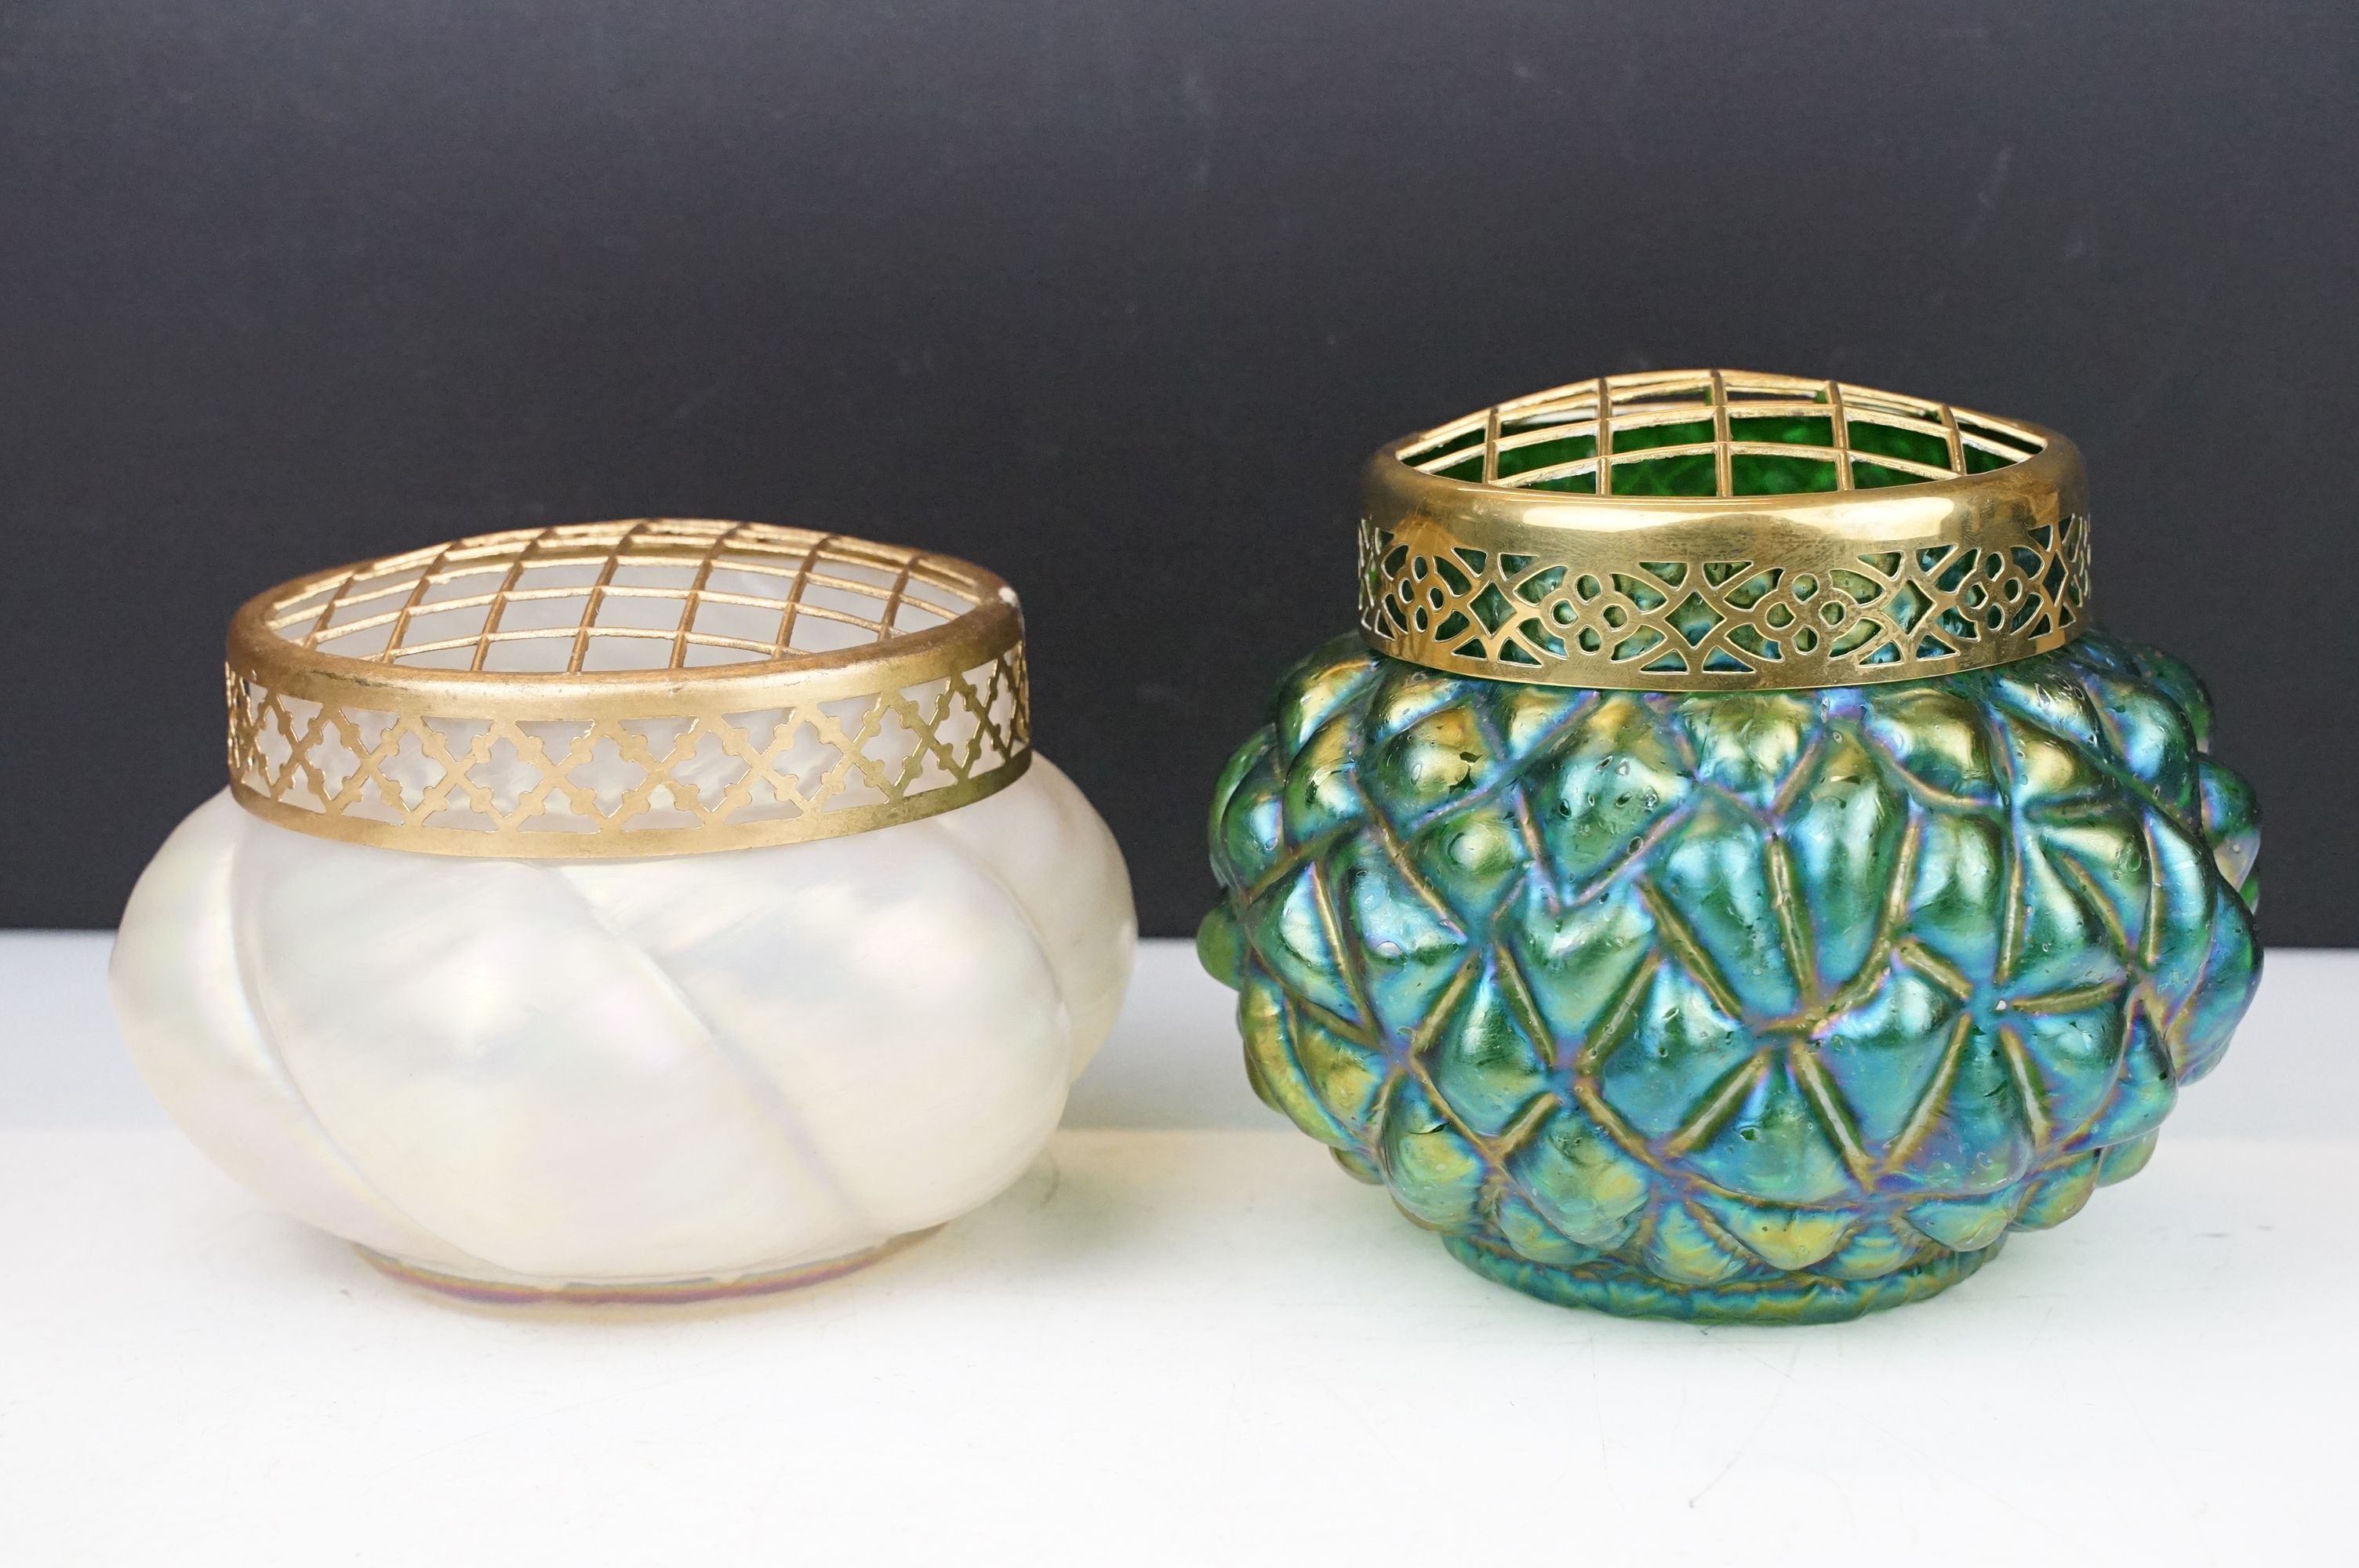 Two early 20th century Kralik iridescent glass rose bowls to include a green glass textured